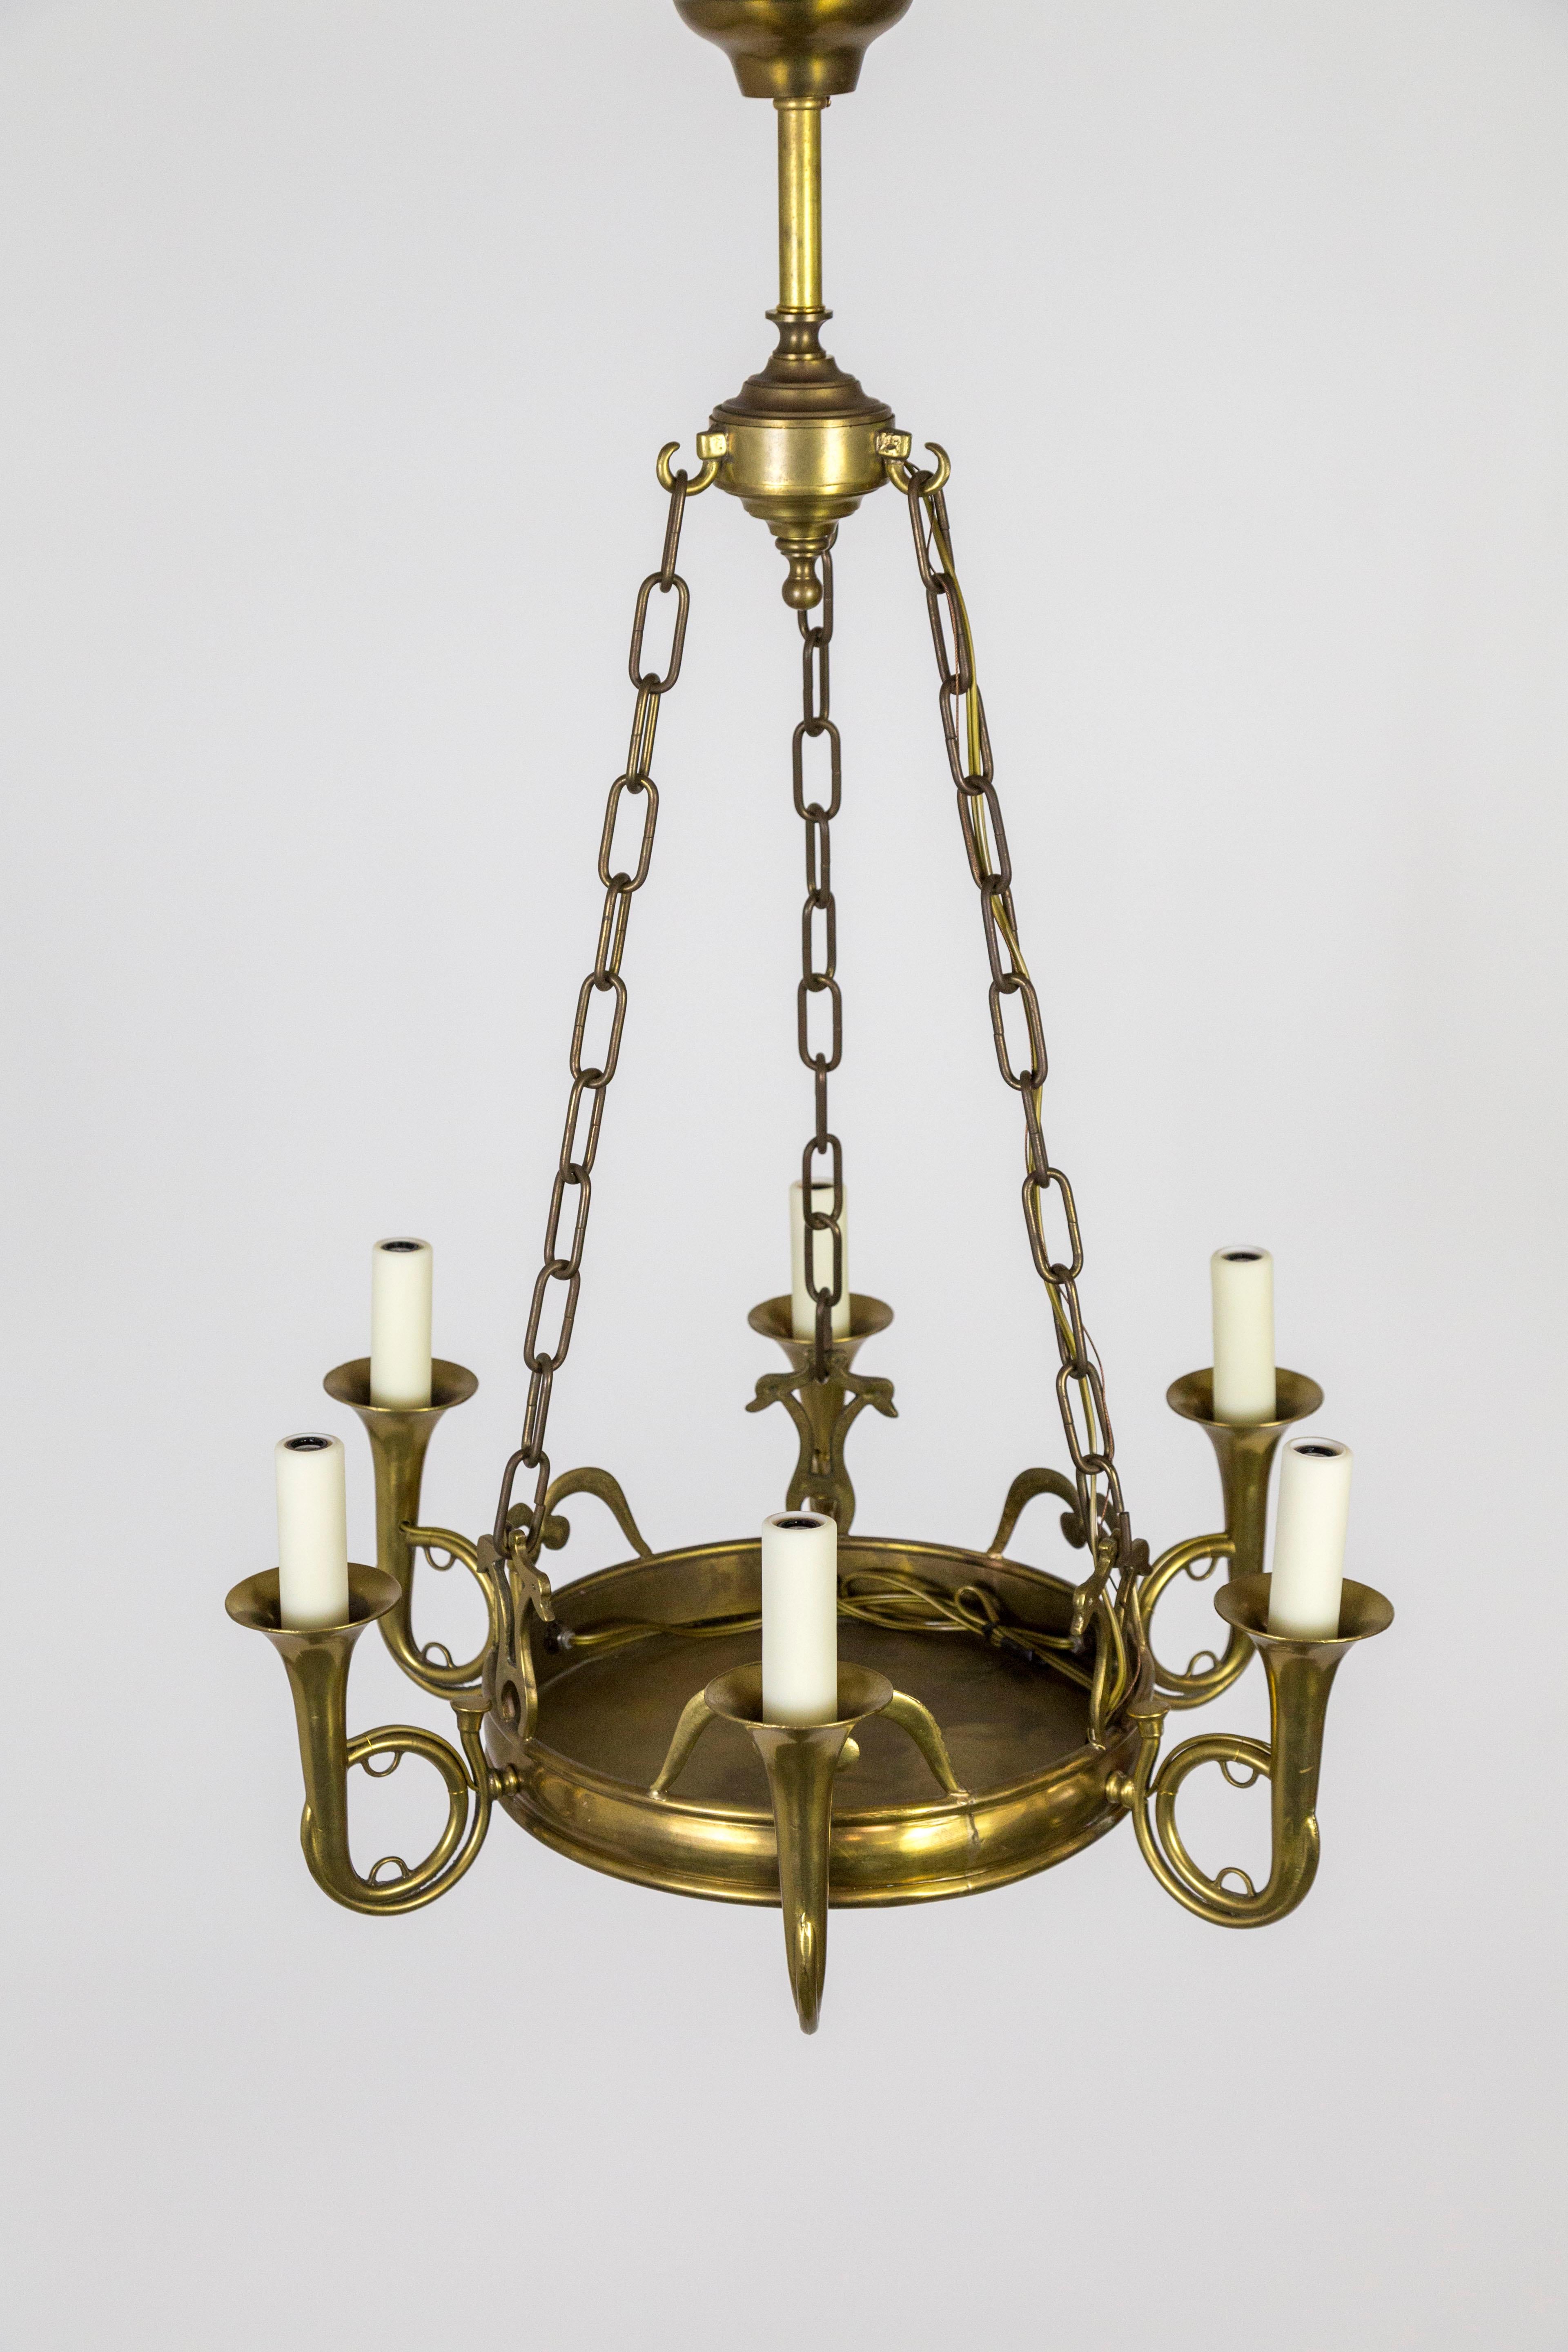 Solid brass hunting horn chandelier with 6 french horn arms. Newly rewired .
E-12 sockets, 60 watt max each. Rich brass patina. Classic design.